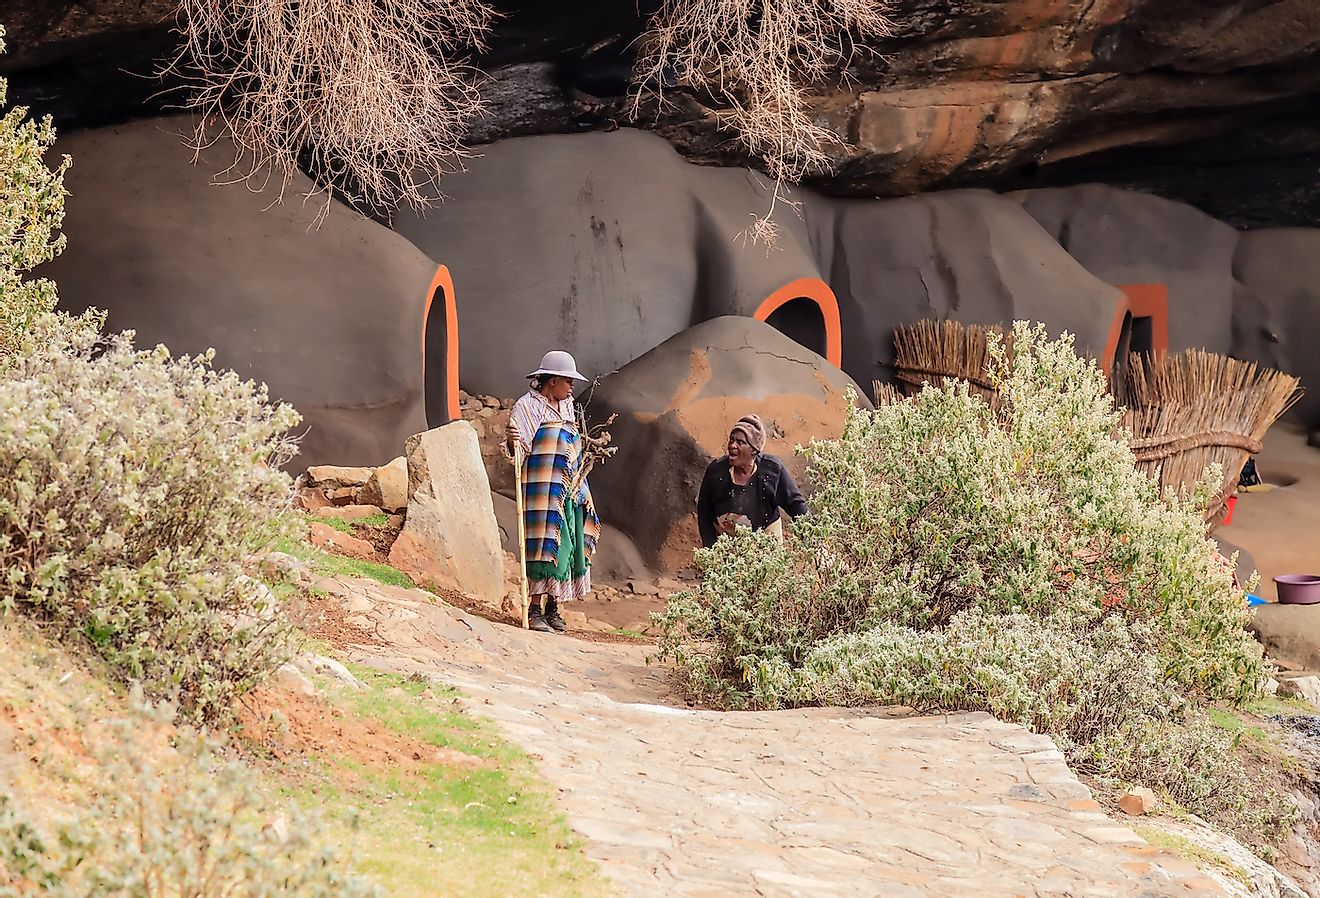 Two indigenous women in front of cave dwellings made out of mud in the district of Berea, Lesotho. Image credit: Chr. Offenberg/Shutterstock.com